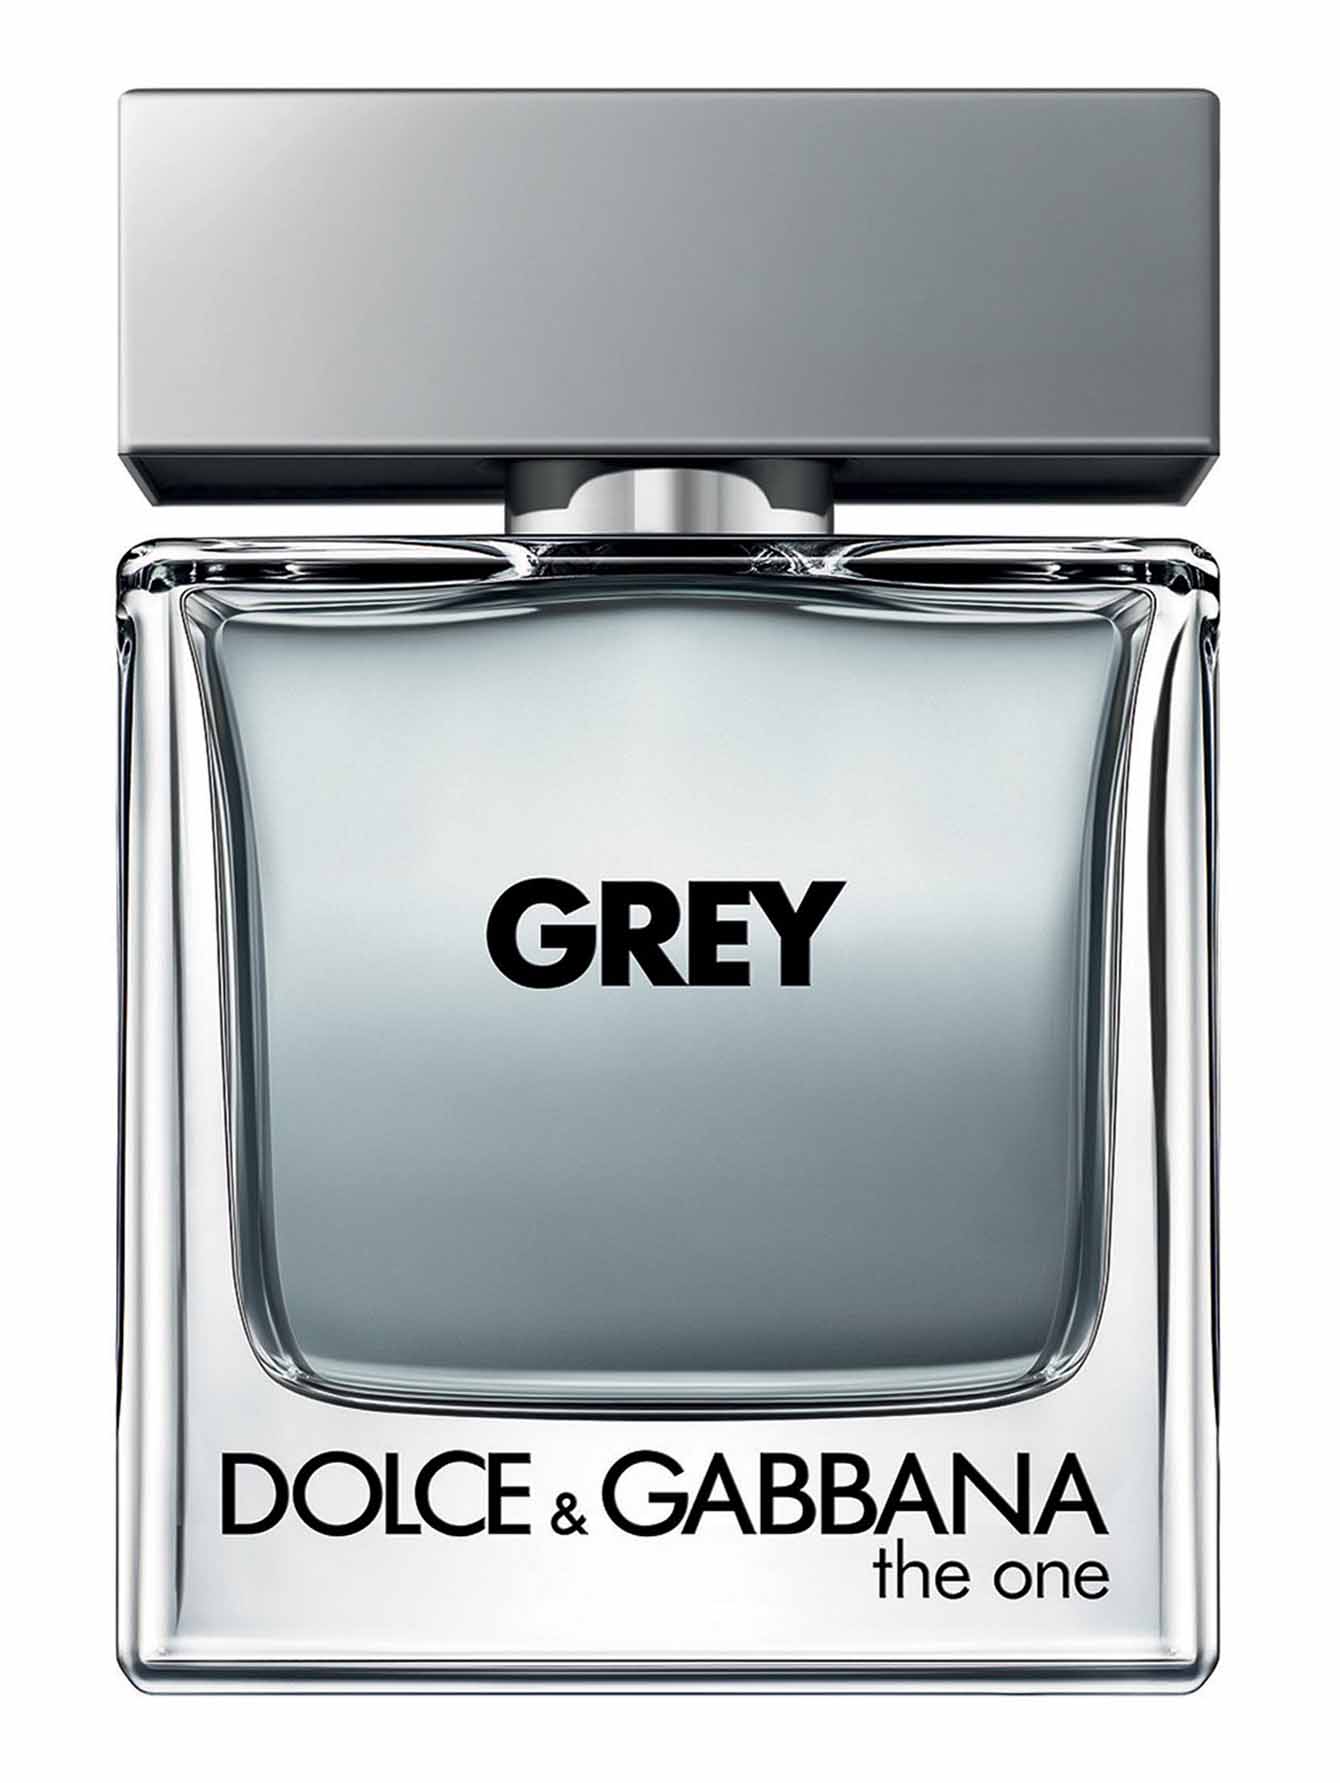 Мужская вода dolce gabbana. Grey Dolce Gabbana Парфюм мужской. Dolce&Gabbana the one for men Toilette 100 ml. Dolce Gabbana the one Grey 100ml. Dolce Gabbana the one for men 100 мл.